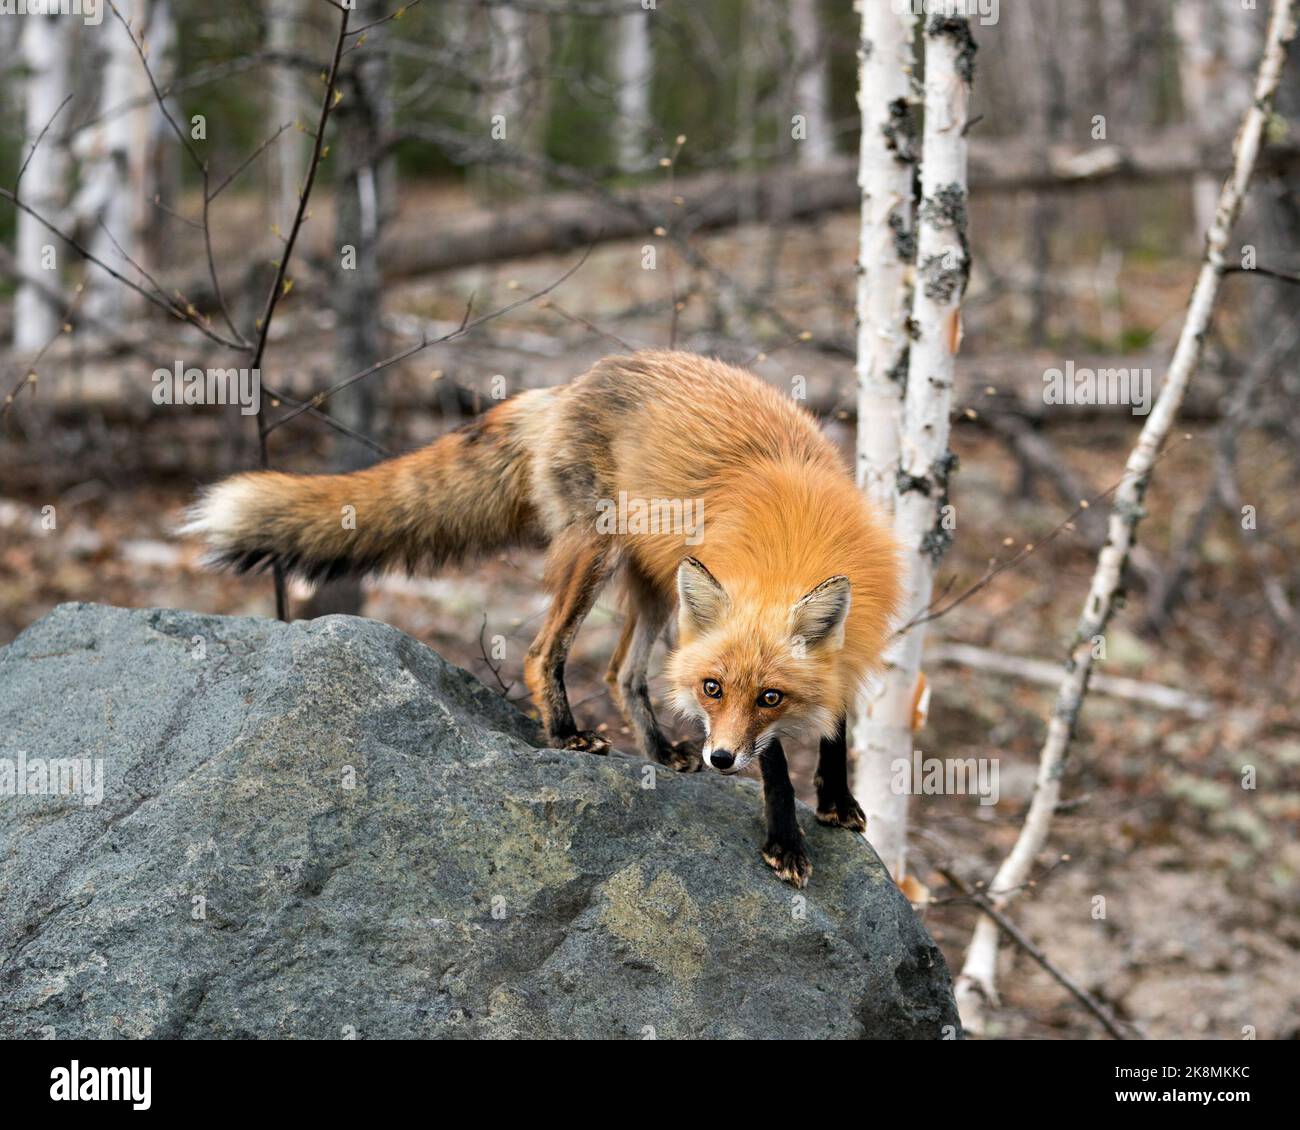 Red fox close-up standing on a big rock and looking at camera with a blur forest background in its environment and habitat. Fox Image. Picture. Stock Photo